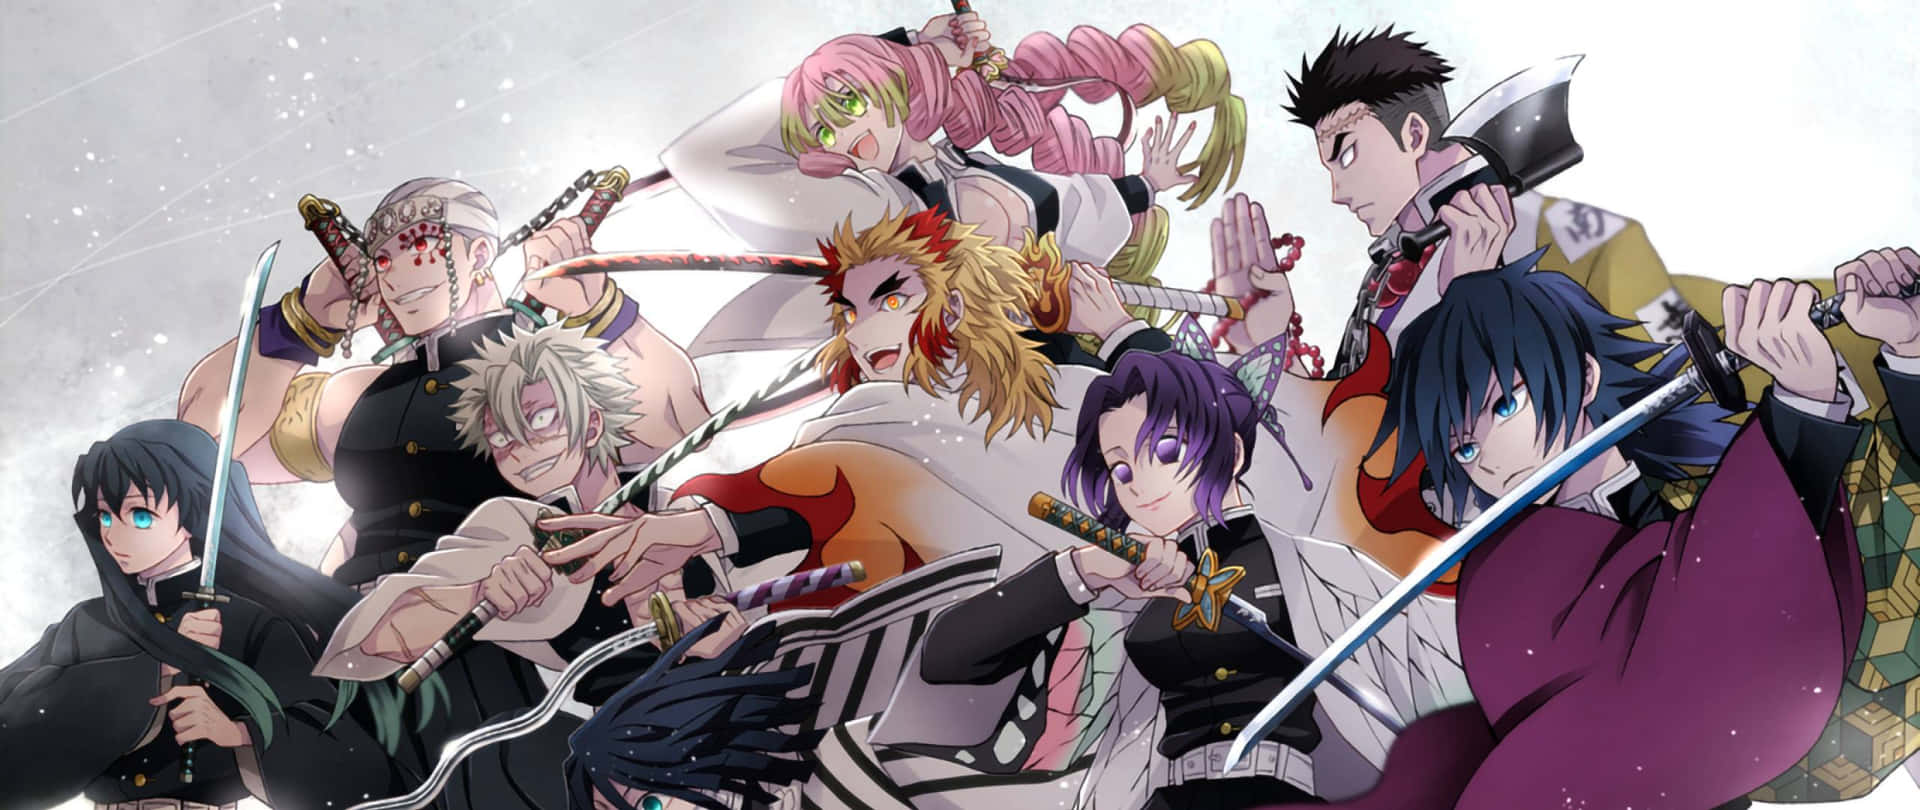 A Group Of Anime Characters With Swords Wallpaper